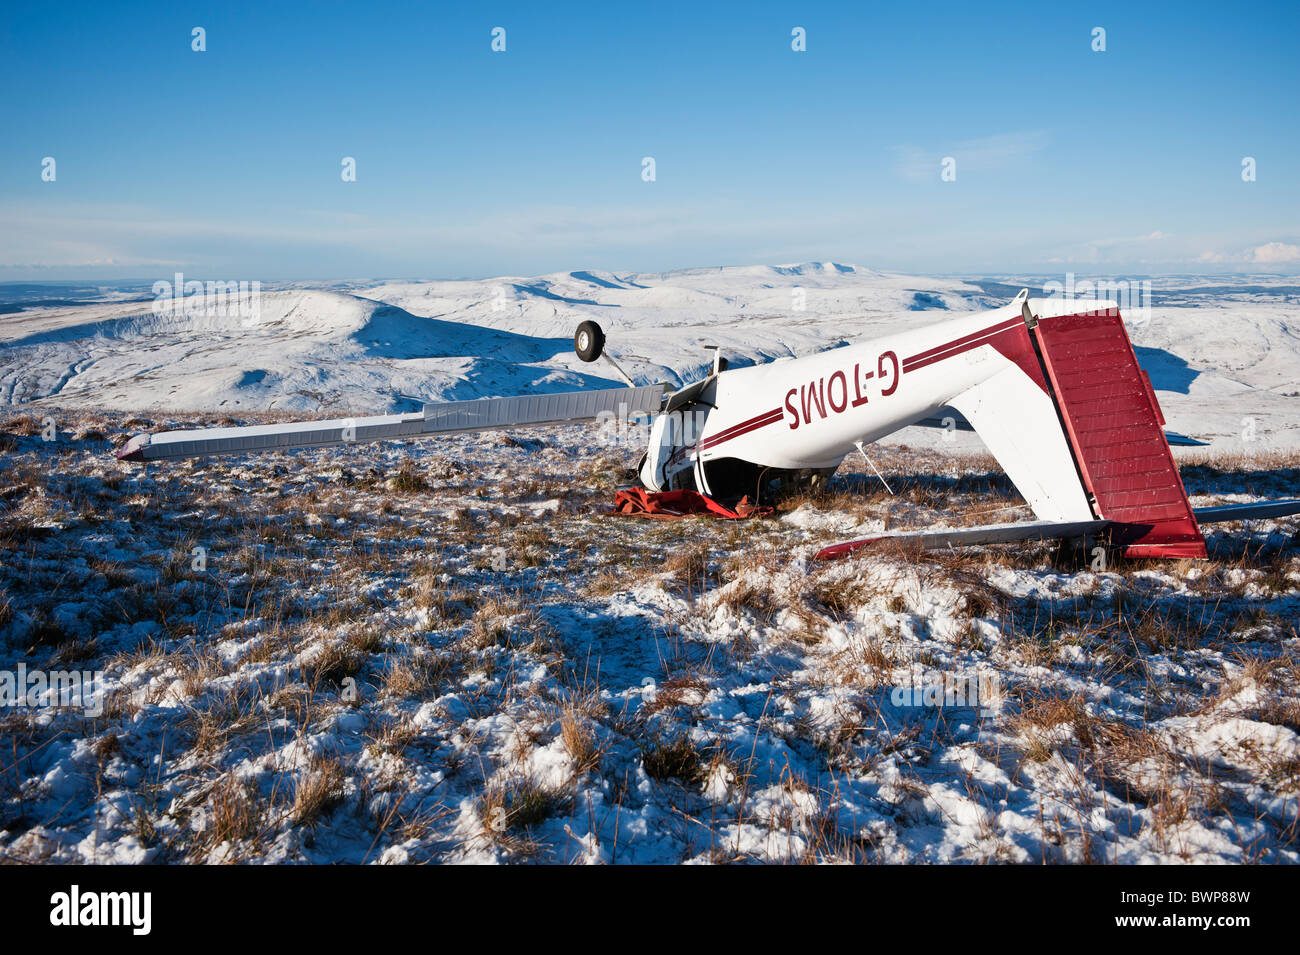 Wreckage of small plane crashed on Friday Nov, 26 2010 near Pen Y Fan, Brecon Beacons national park, Wales Stock Photo